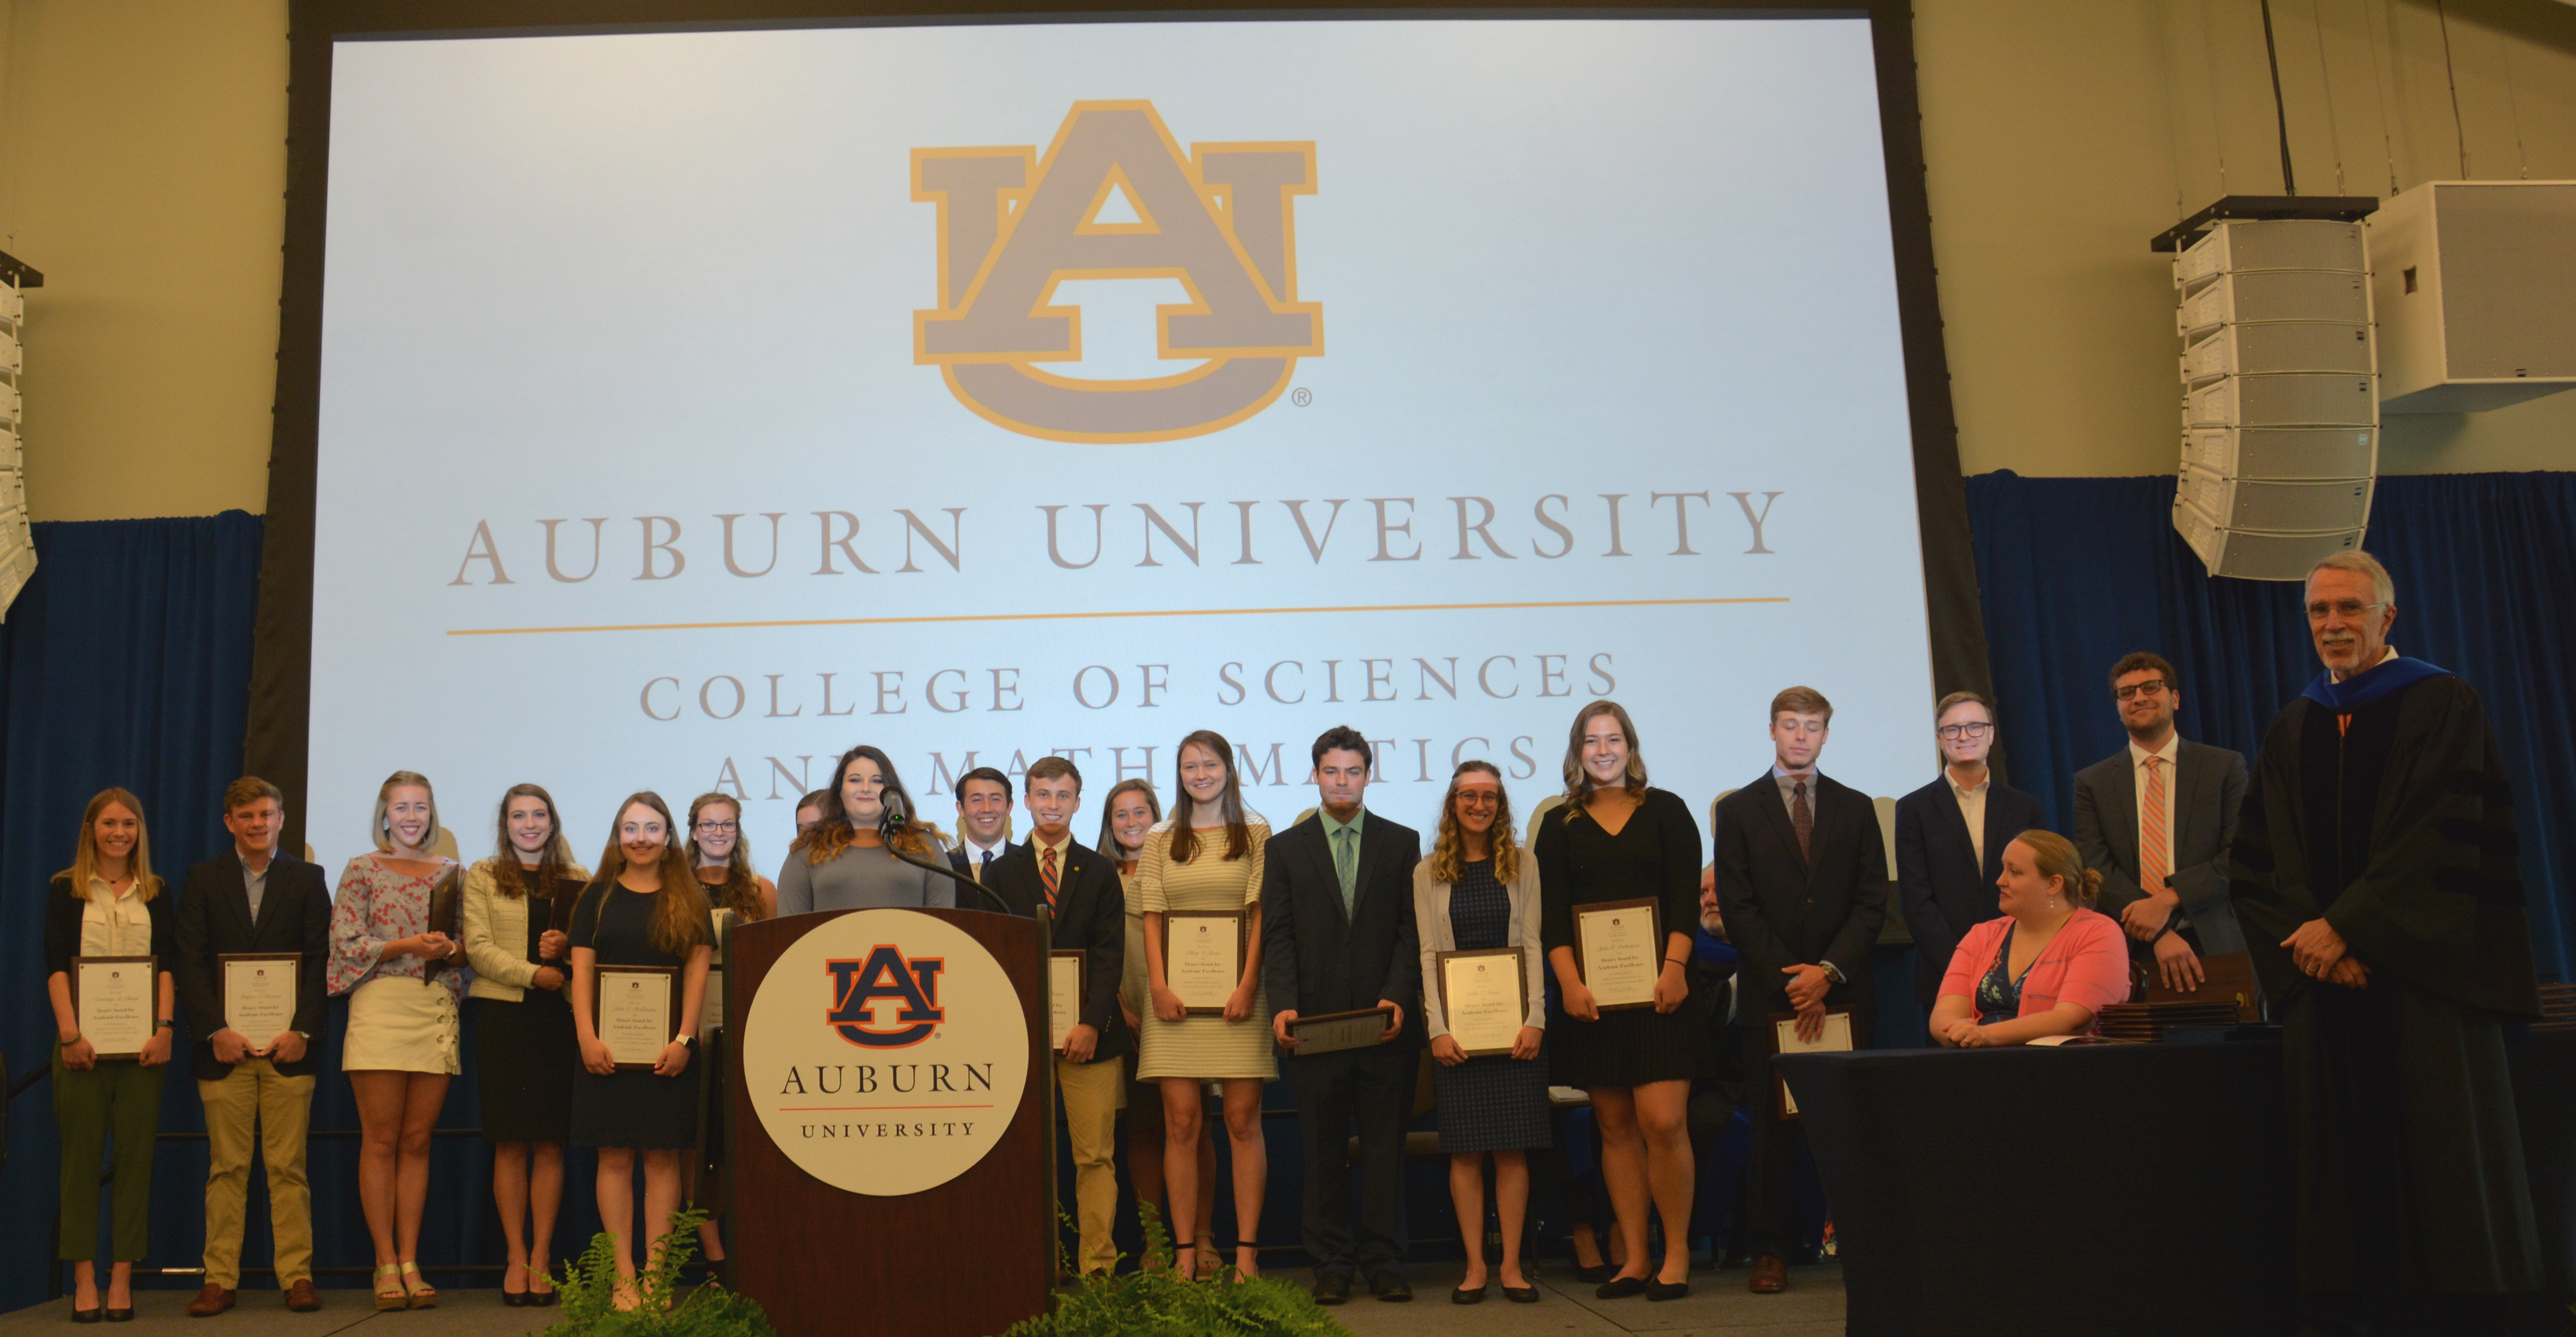 Congratulations to all of the students that were recognized for their achievement at this year's Honors Convocation.